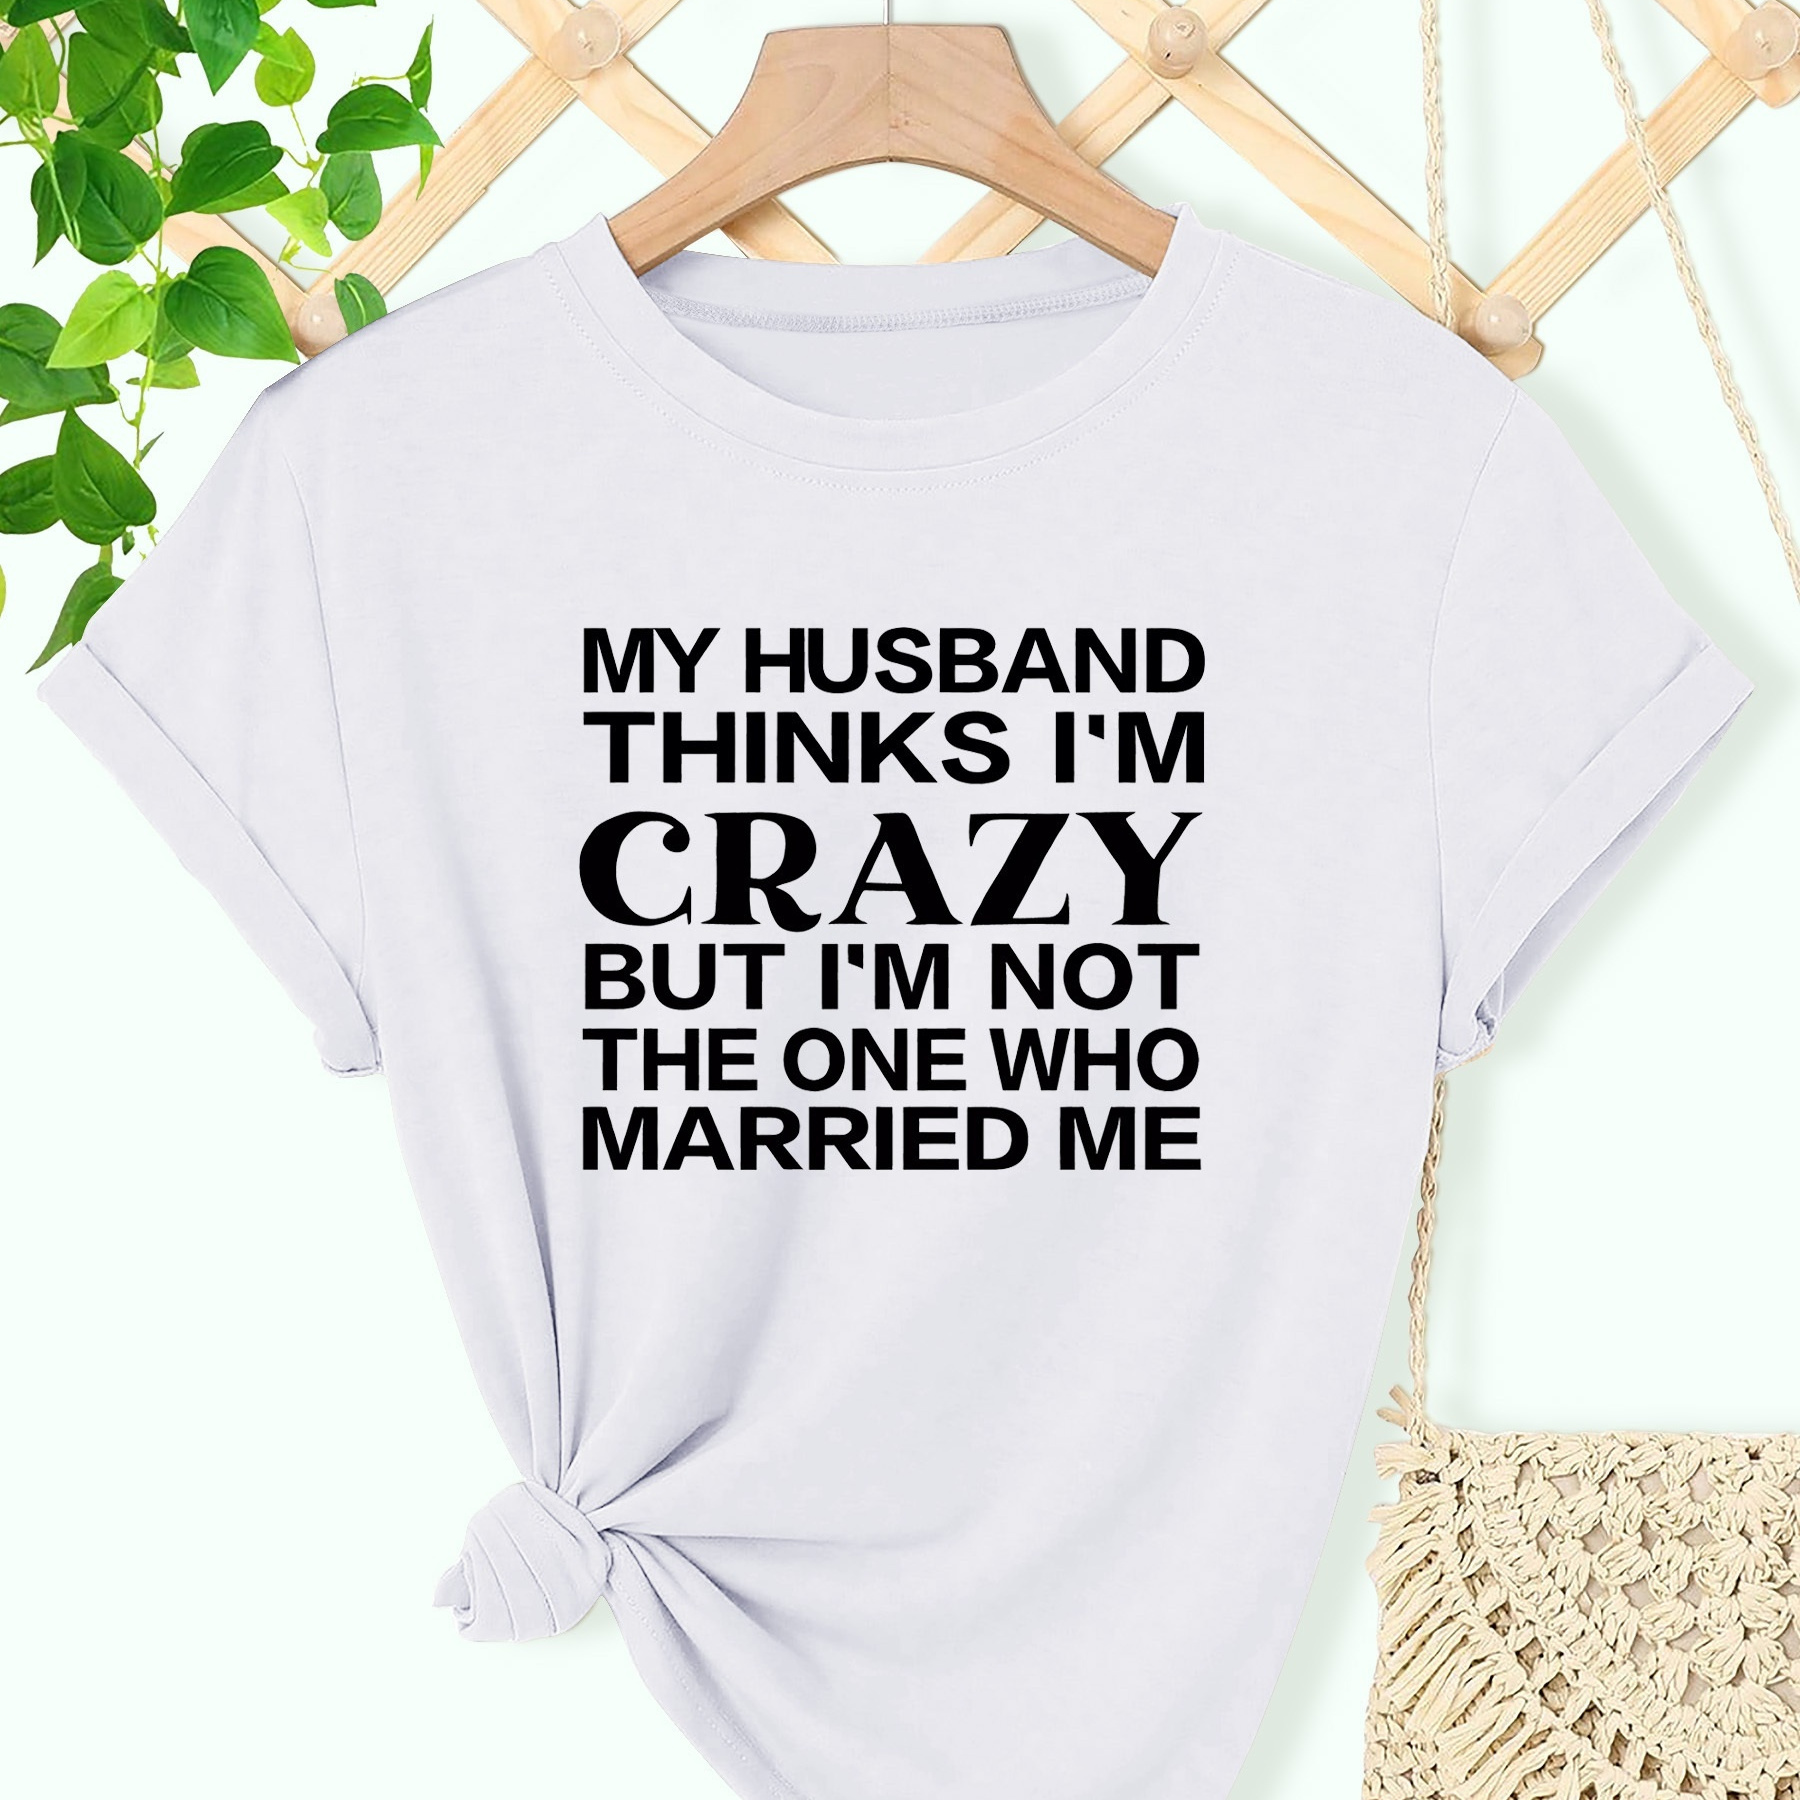 

Women's Casual Short Sleeve T-shirt, "my Husband Thinks I'm Crazy" Funny Print, Summer Round Neck Top, Sporty Leisure Tee